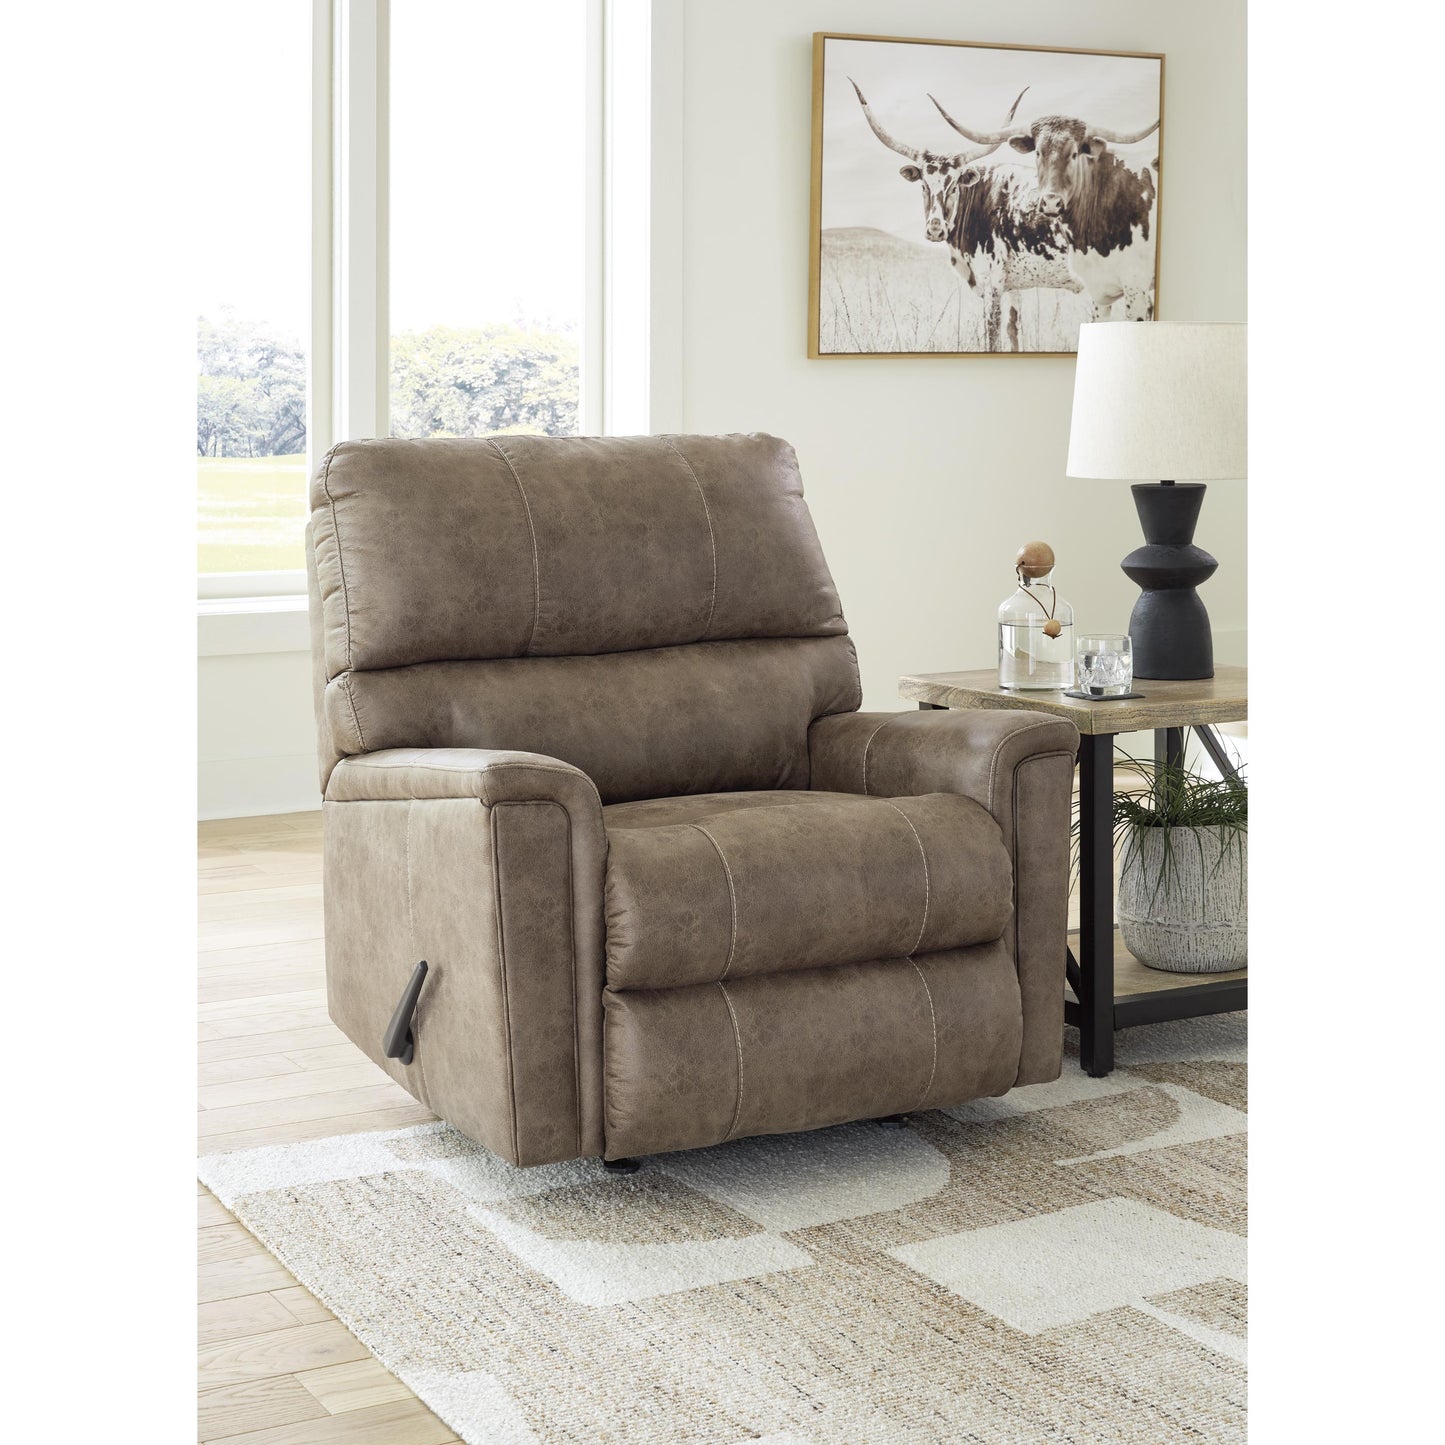 Signature Design by Ashley Recliners Manual 9400425 IMAGE 6